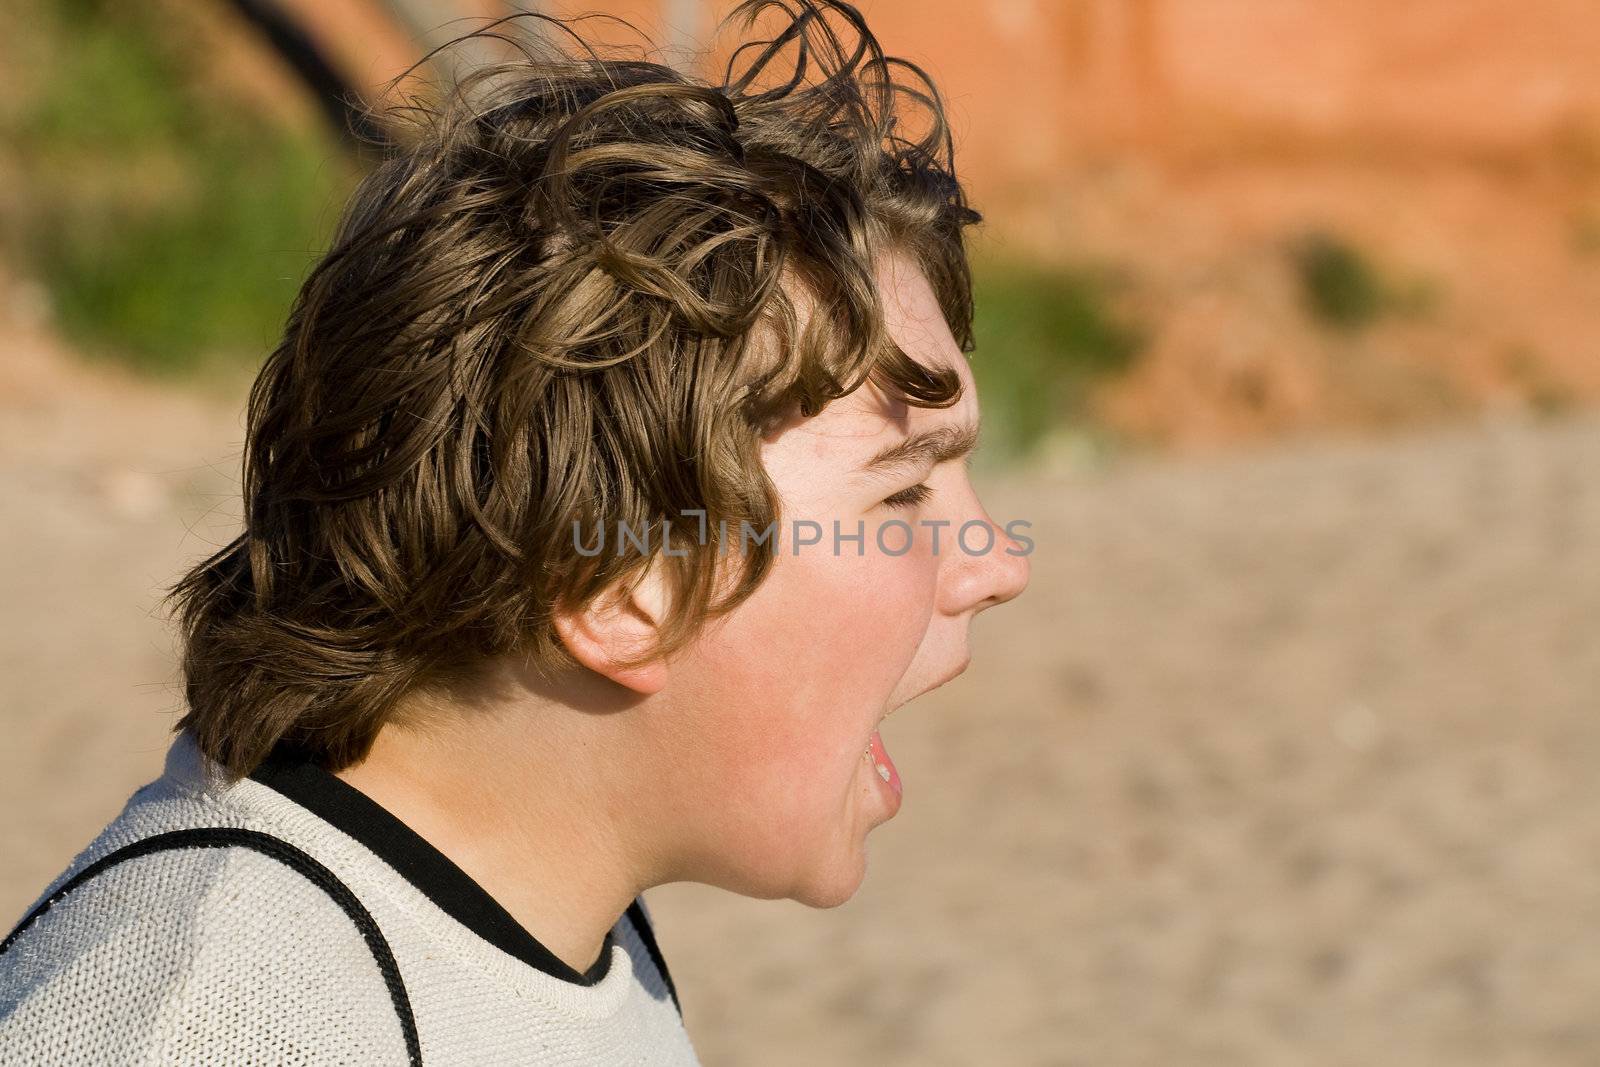 Teenage boy shouting. Beach sand and red sanstouns in background